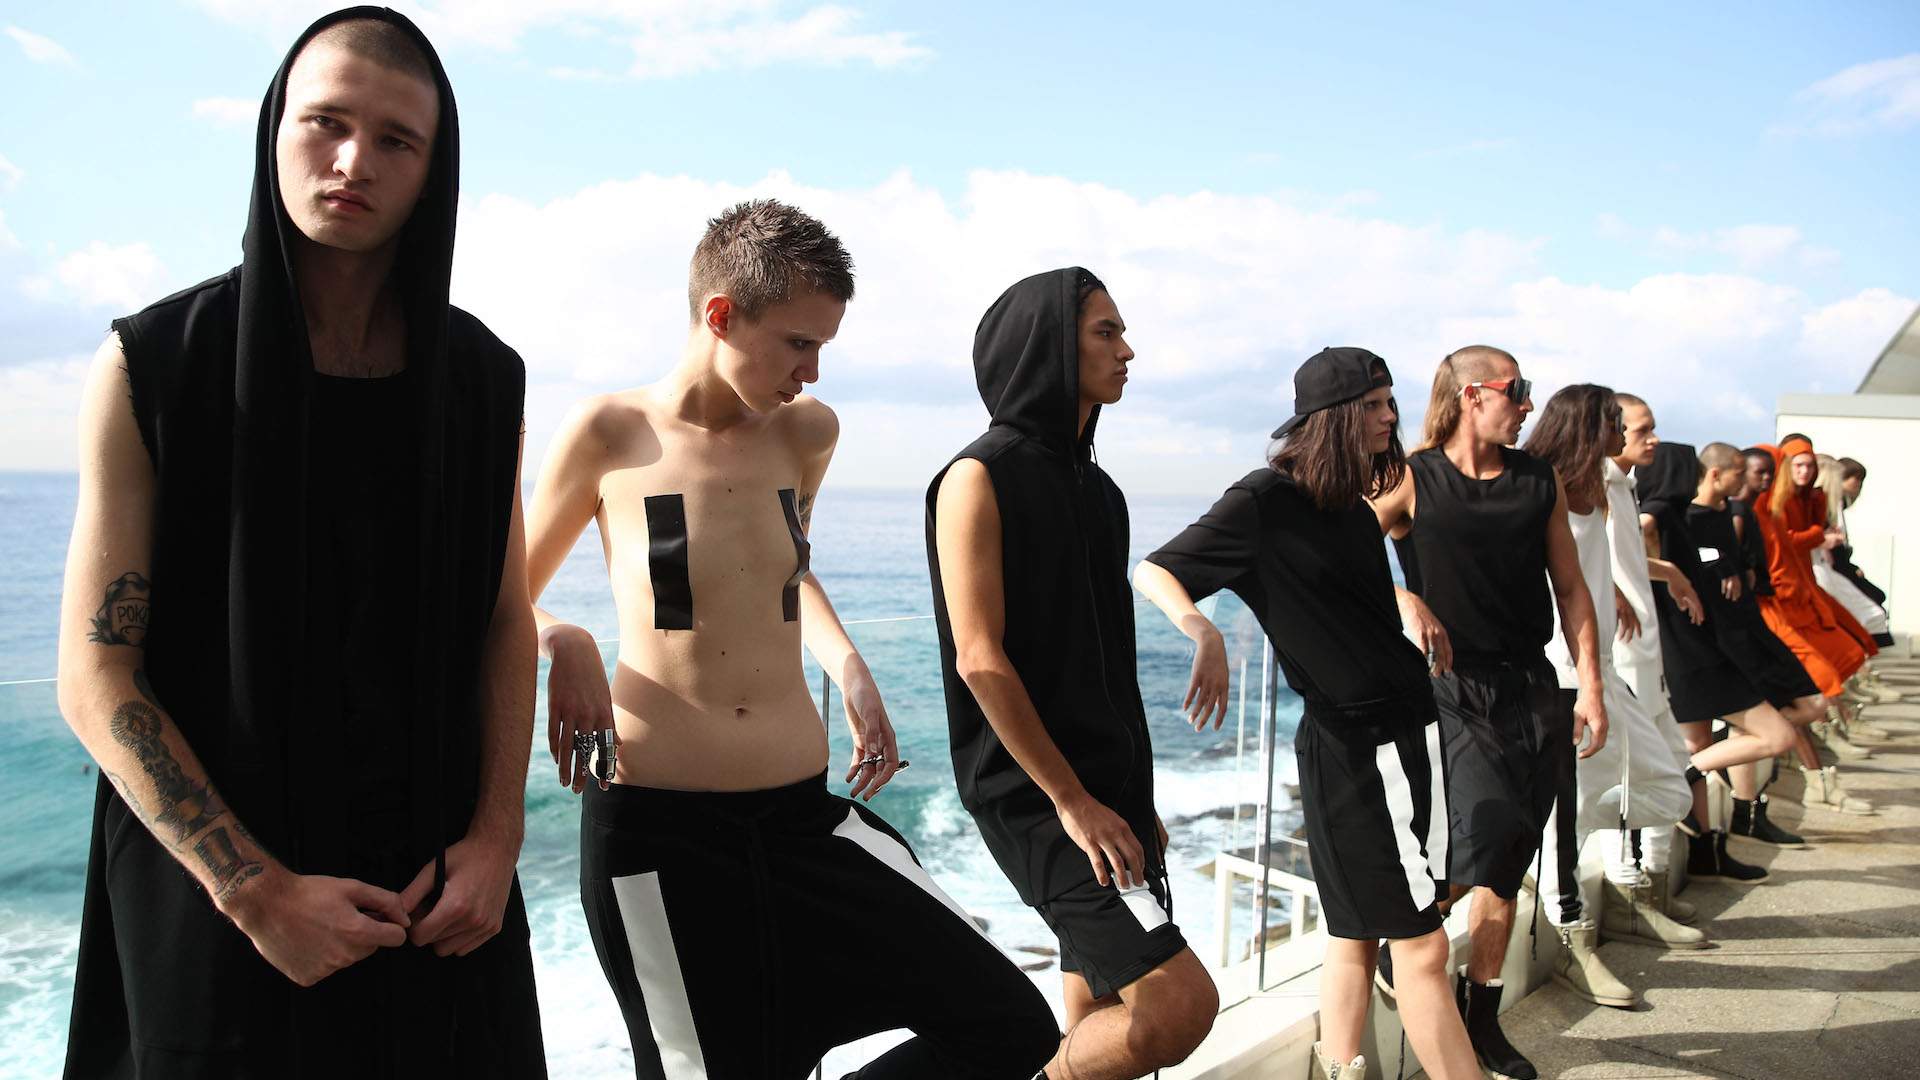 Icebergs' Maurice Terzini Launches New Collection at Australian Fashion Week